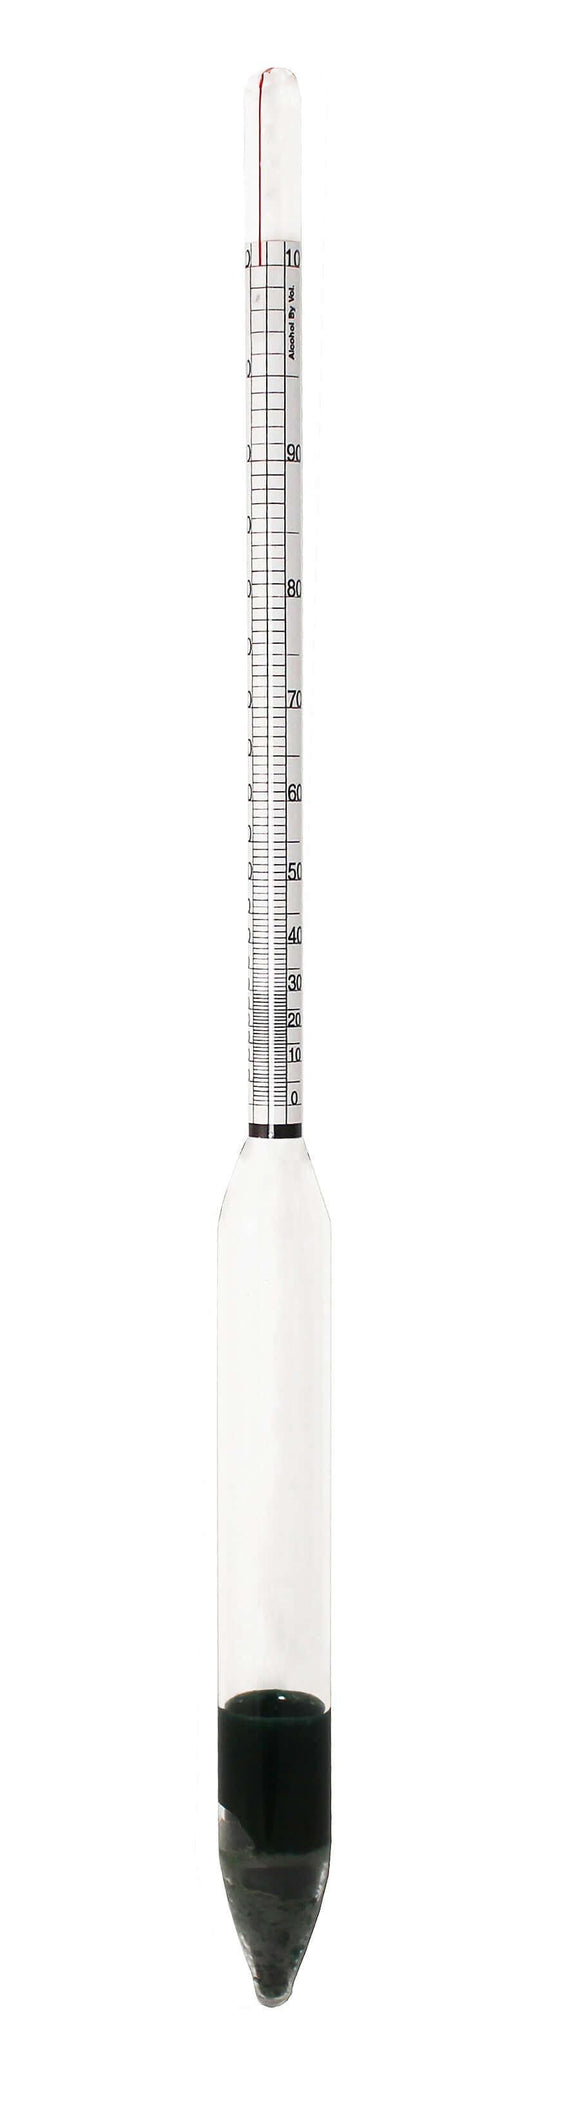 Alcohol Hydrometers with Tralle and Proof Scales from VEE GEE Scientific